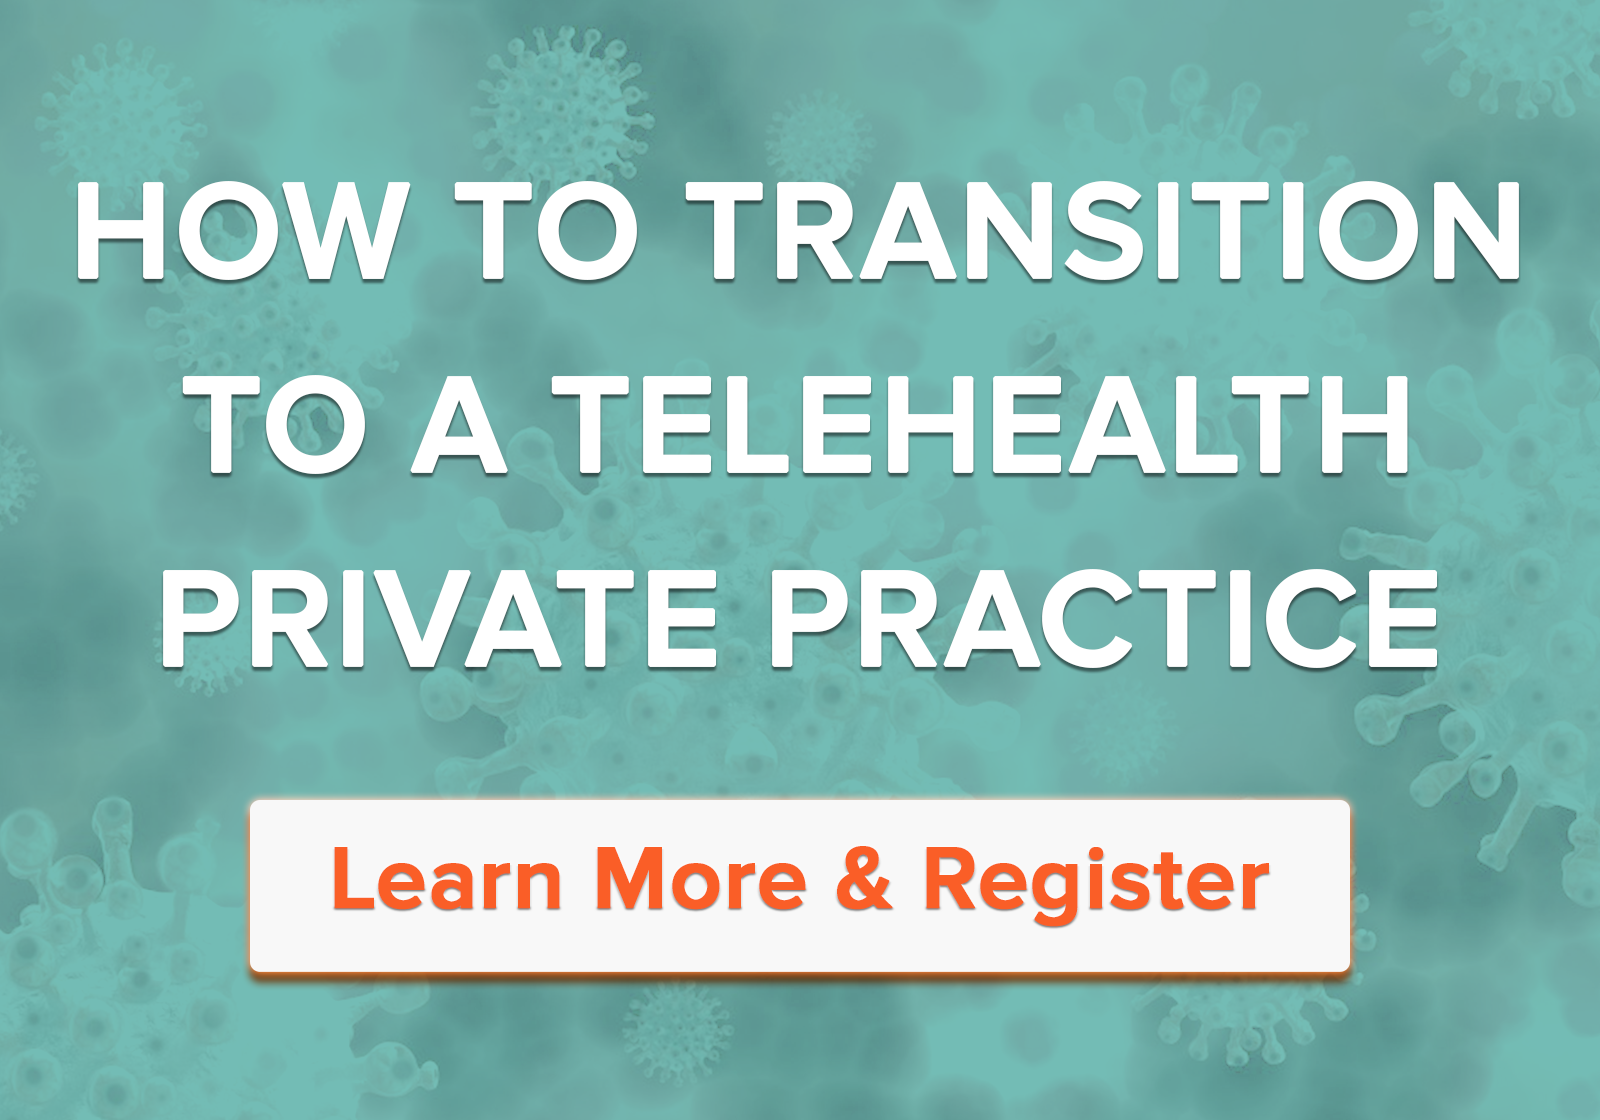 Free online e-course for therapists | How to Transition to a Telehealth Private Practice | Brighter Vision